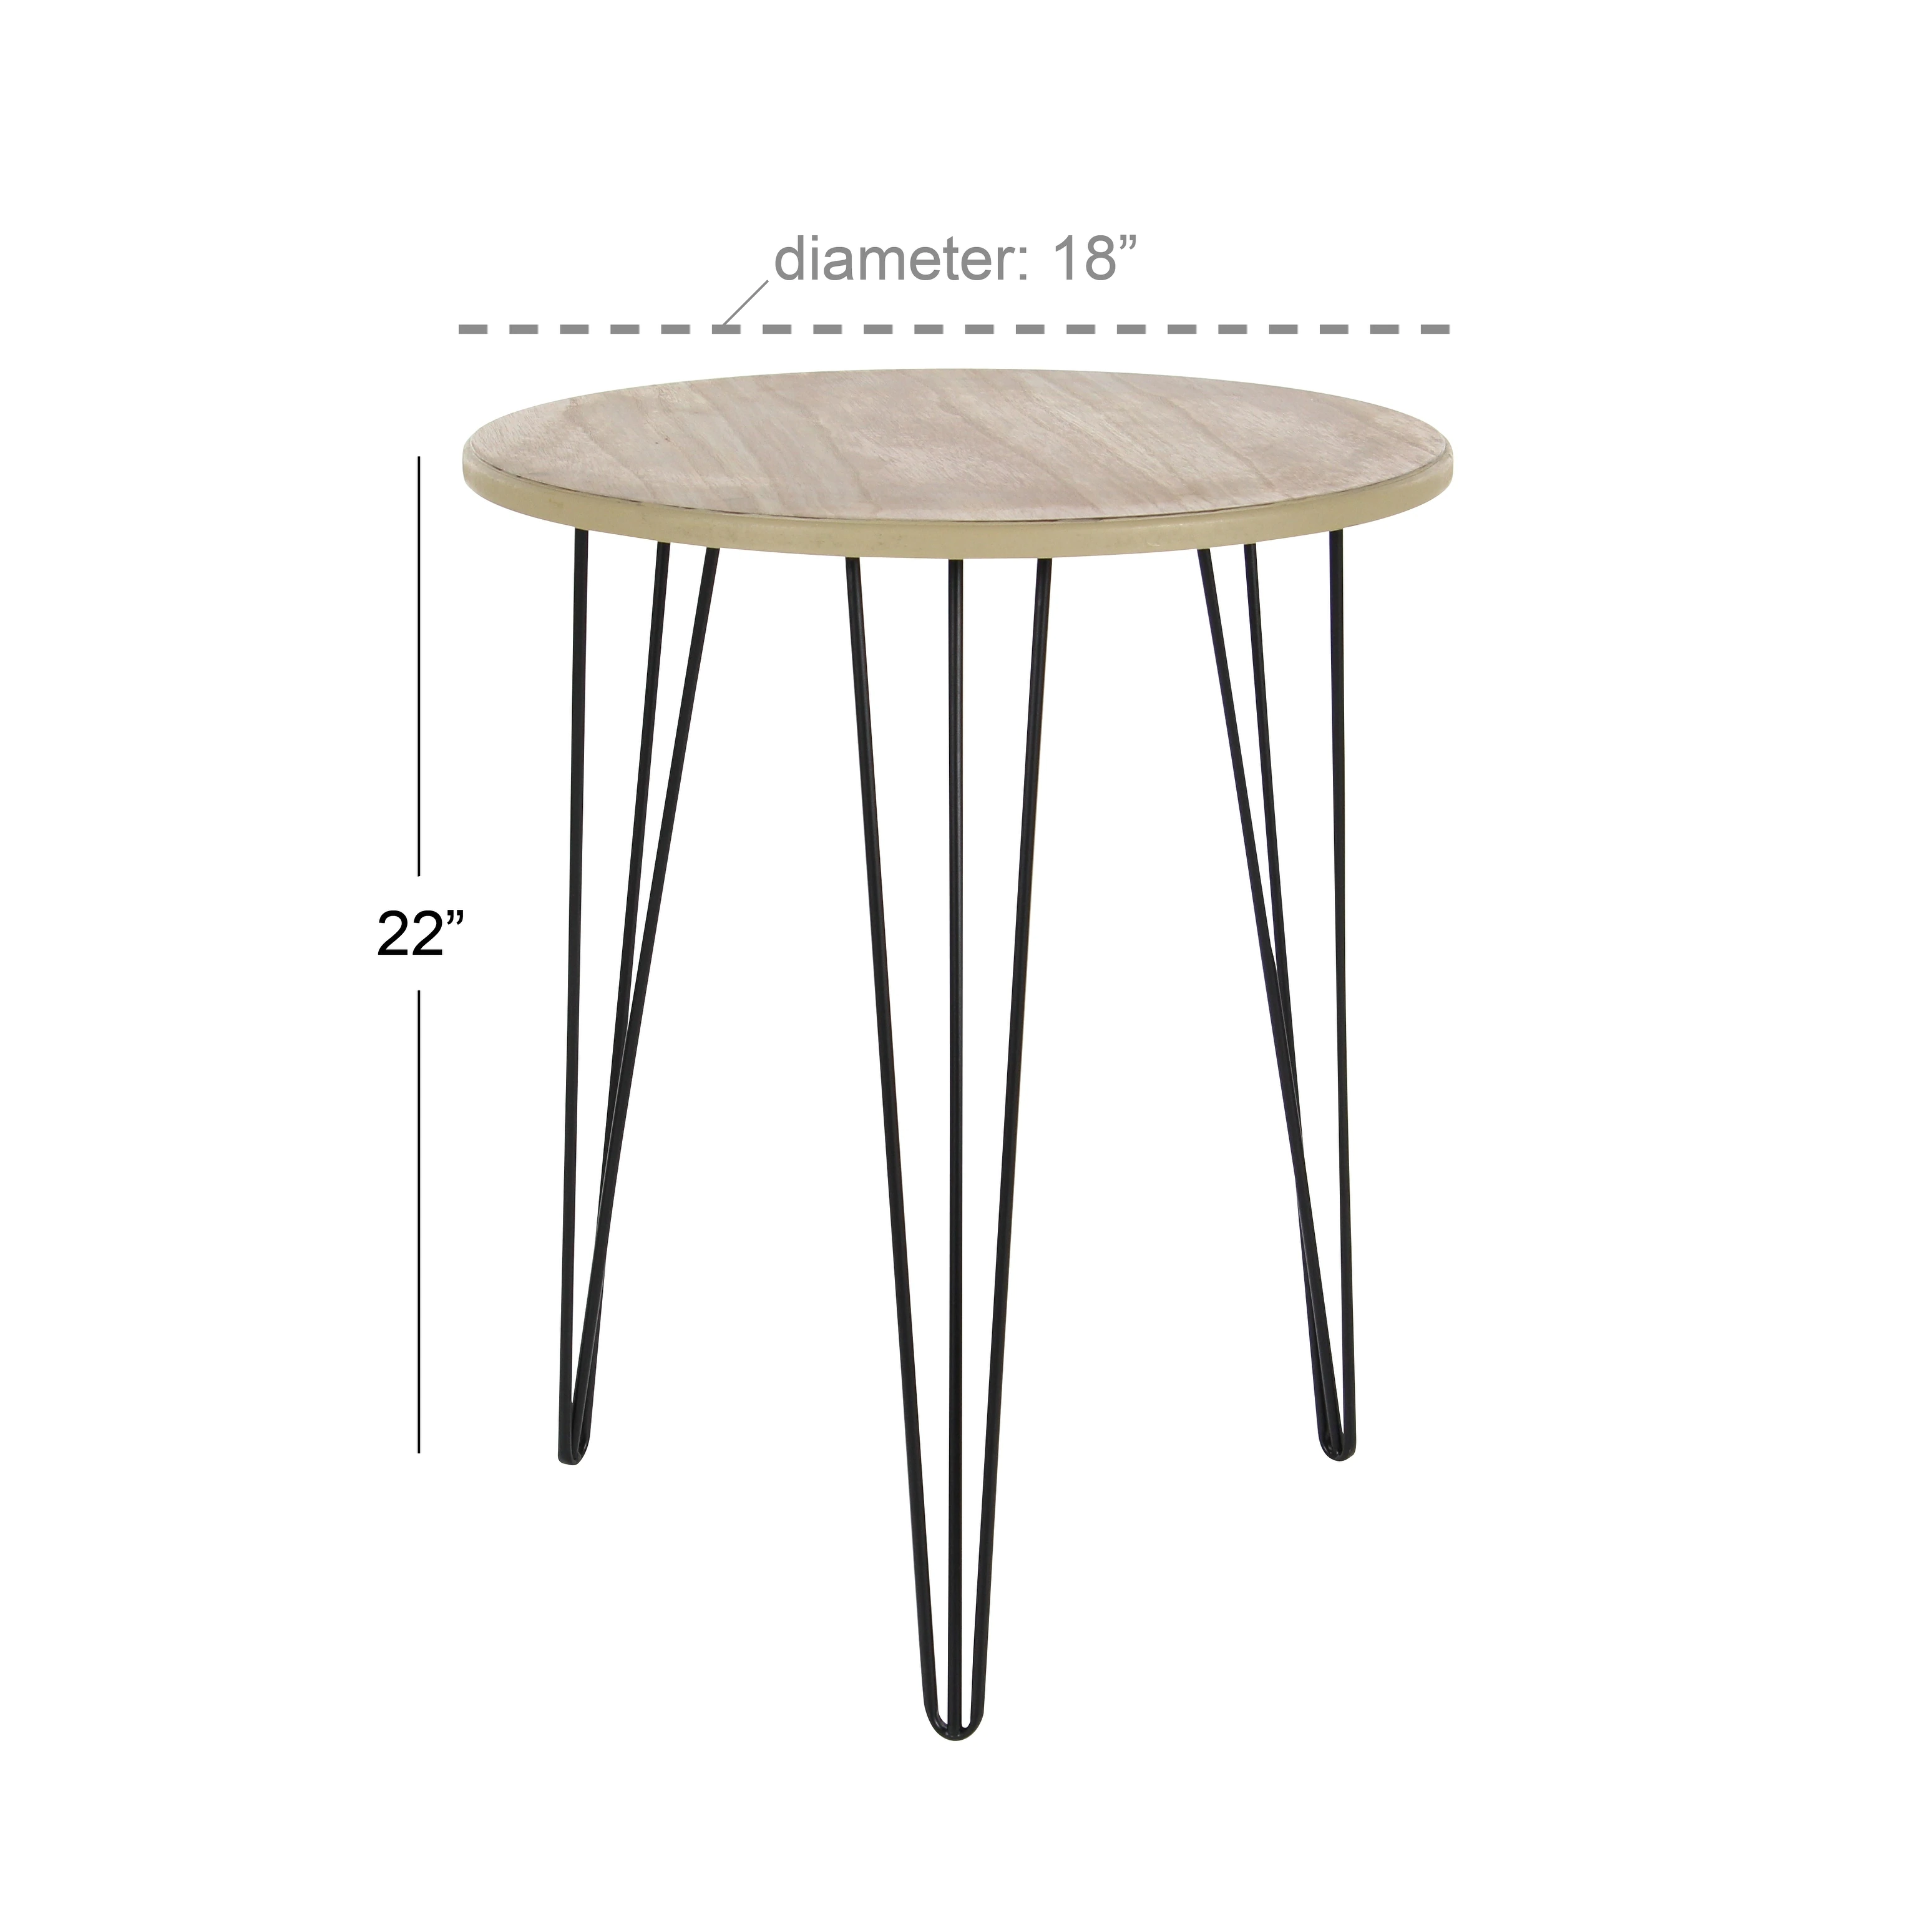 modern inch round wood and iron accent table studio with screw legs free shipping today cordless floor lamp rechargeable white beach pieces threshold transitions teal home decor